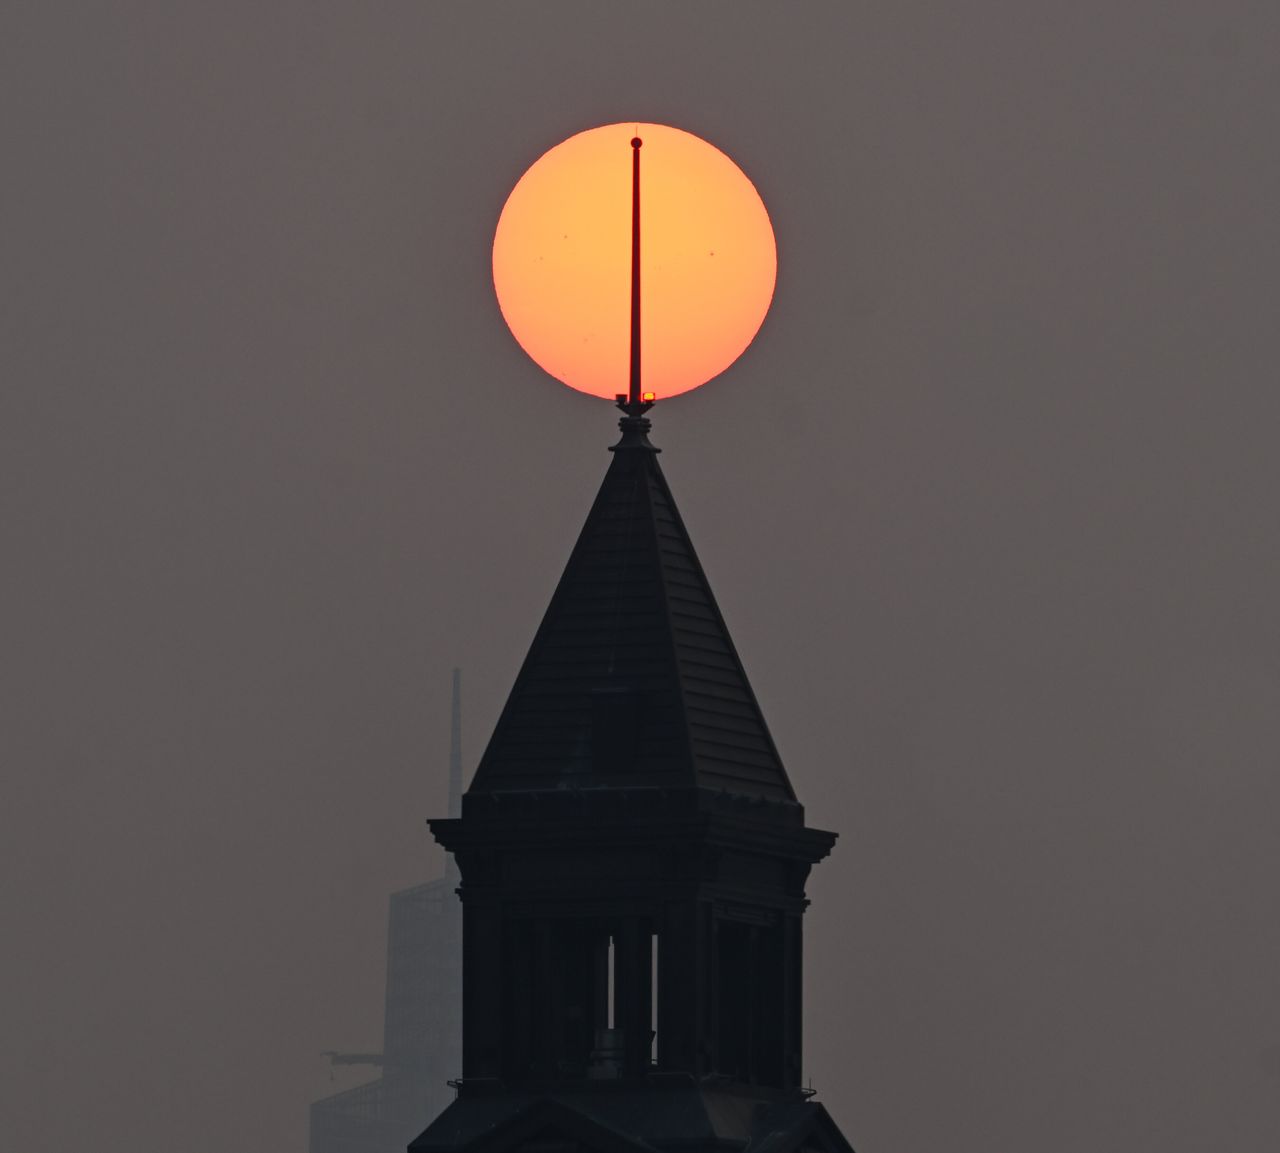 The sun as it rises in a hazy, smoky sky in New York City on Wednesday.